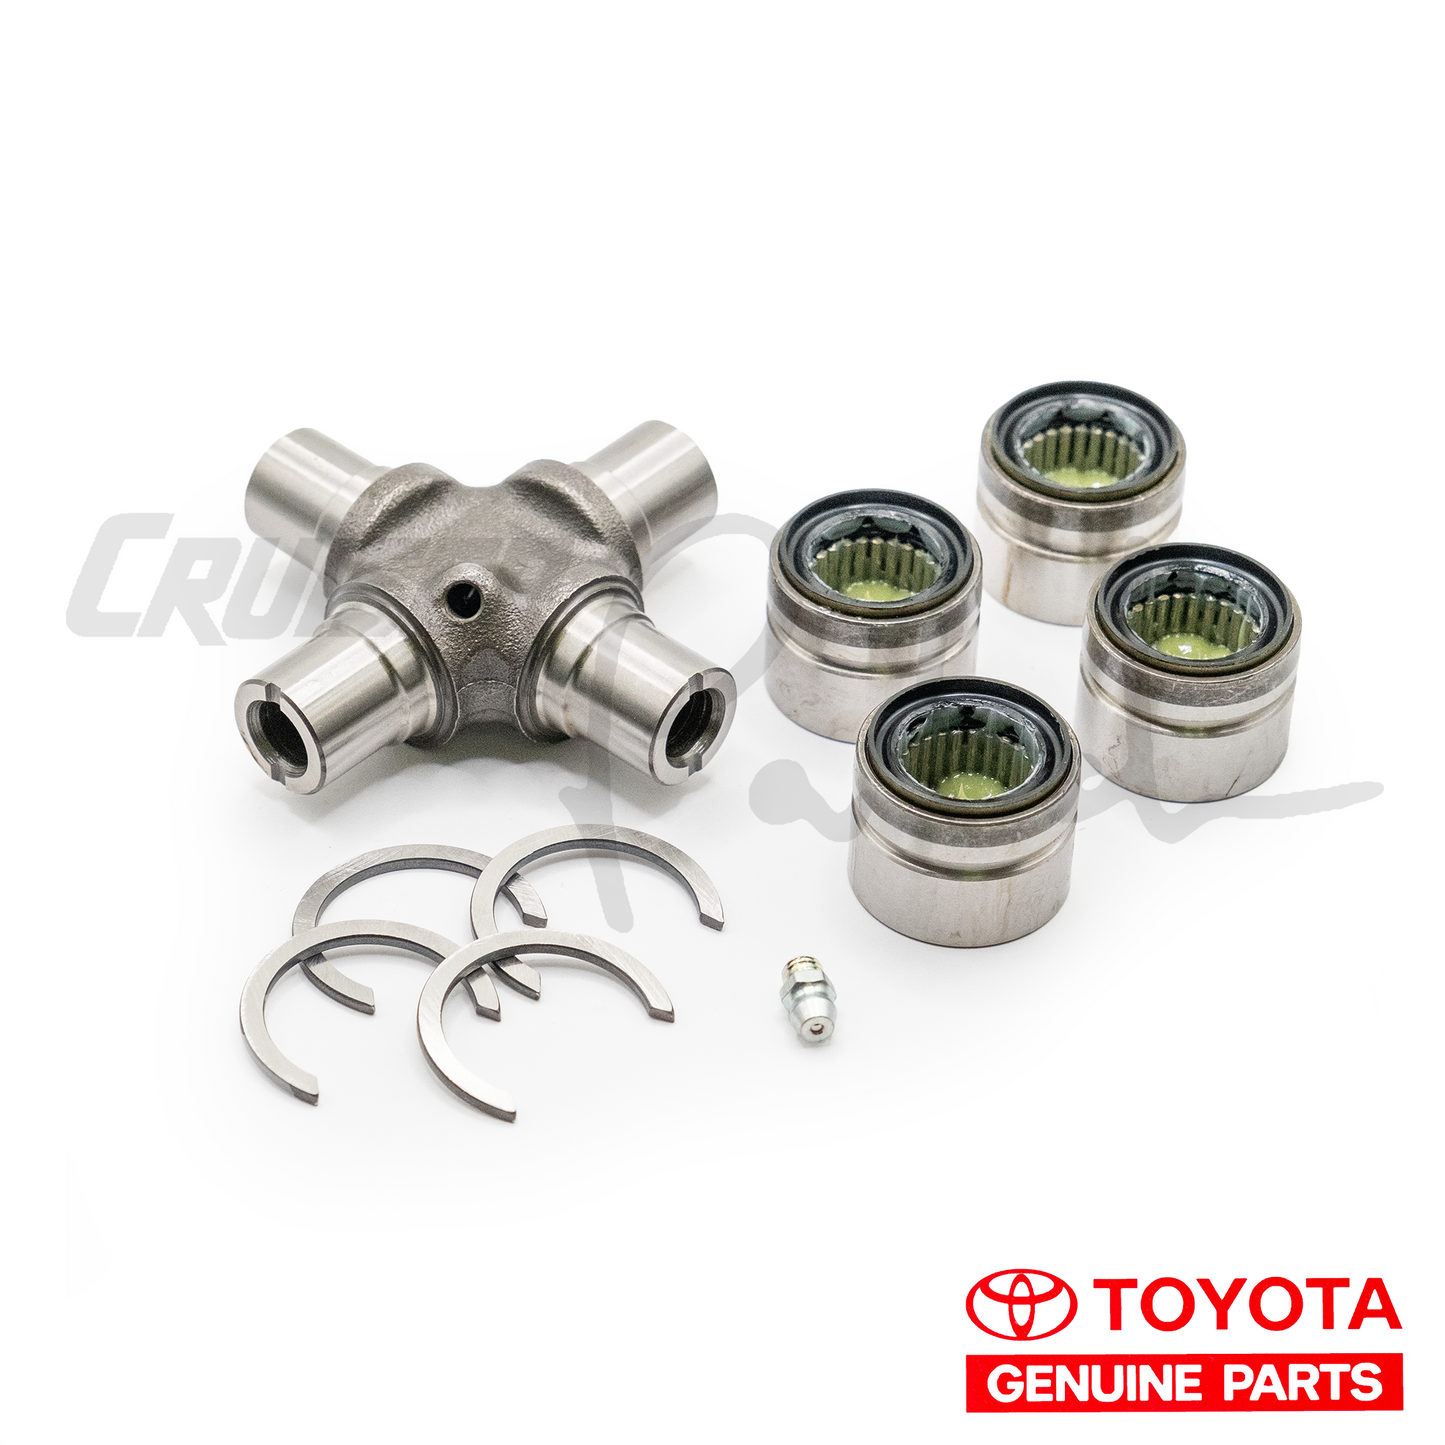 Toyota Land Cruiser and LX SUV Rear Spider Joint kit (U-joint)